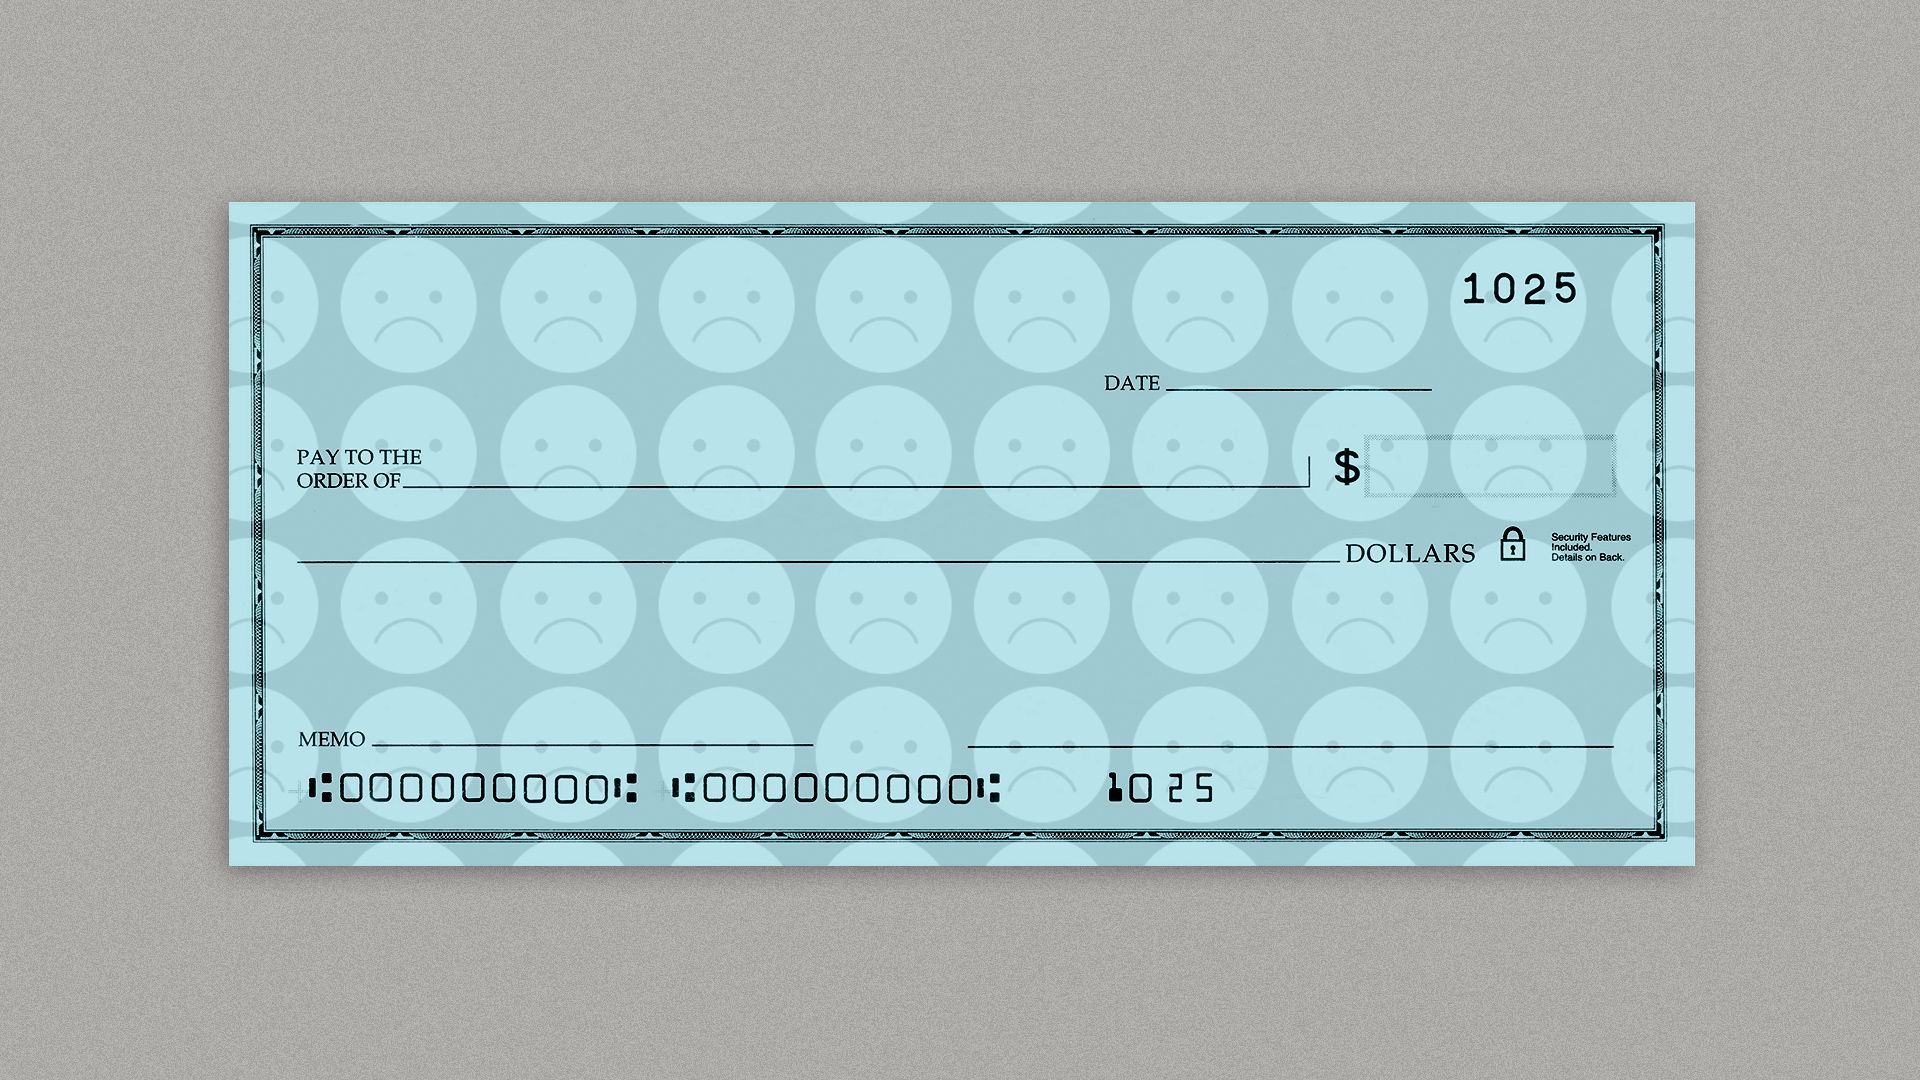 Illustration of a blank check with a pattern of sad faces as the watermark image. 